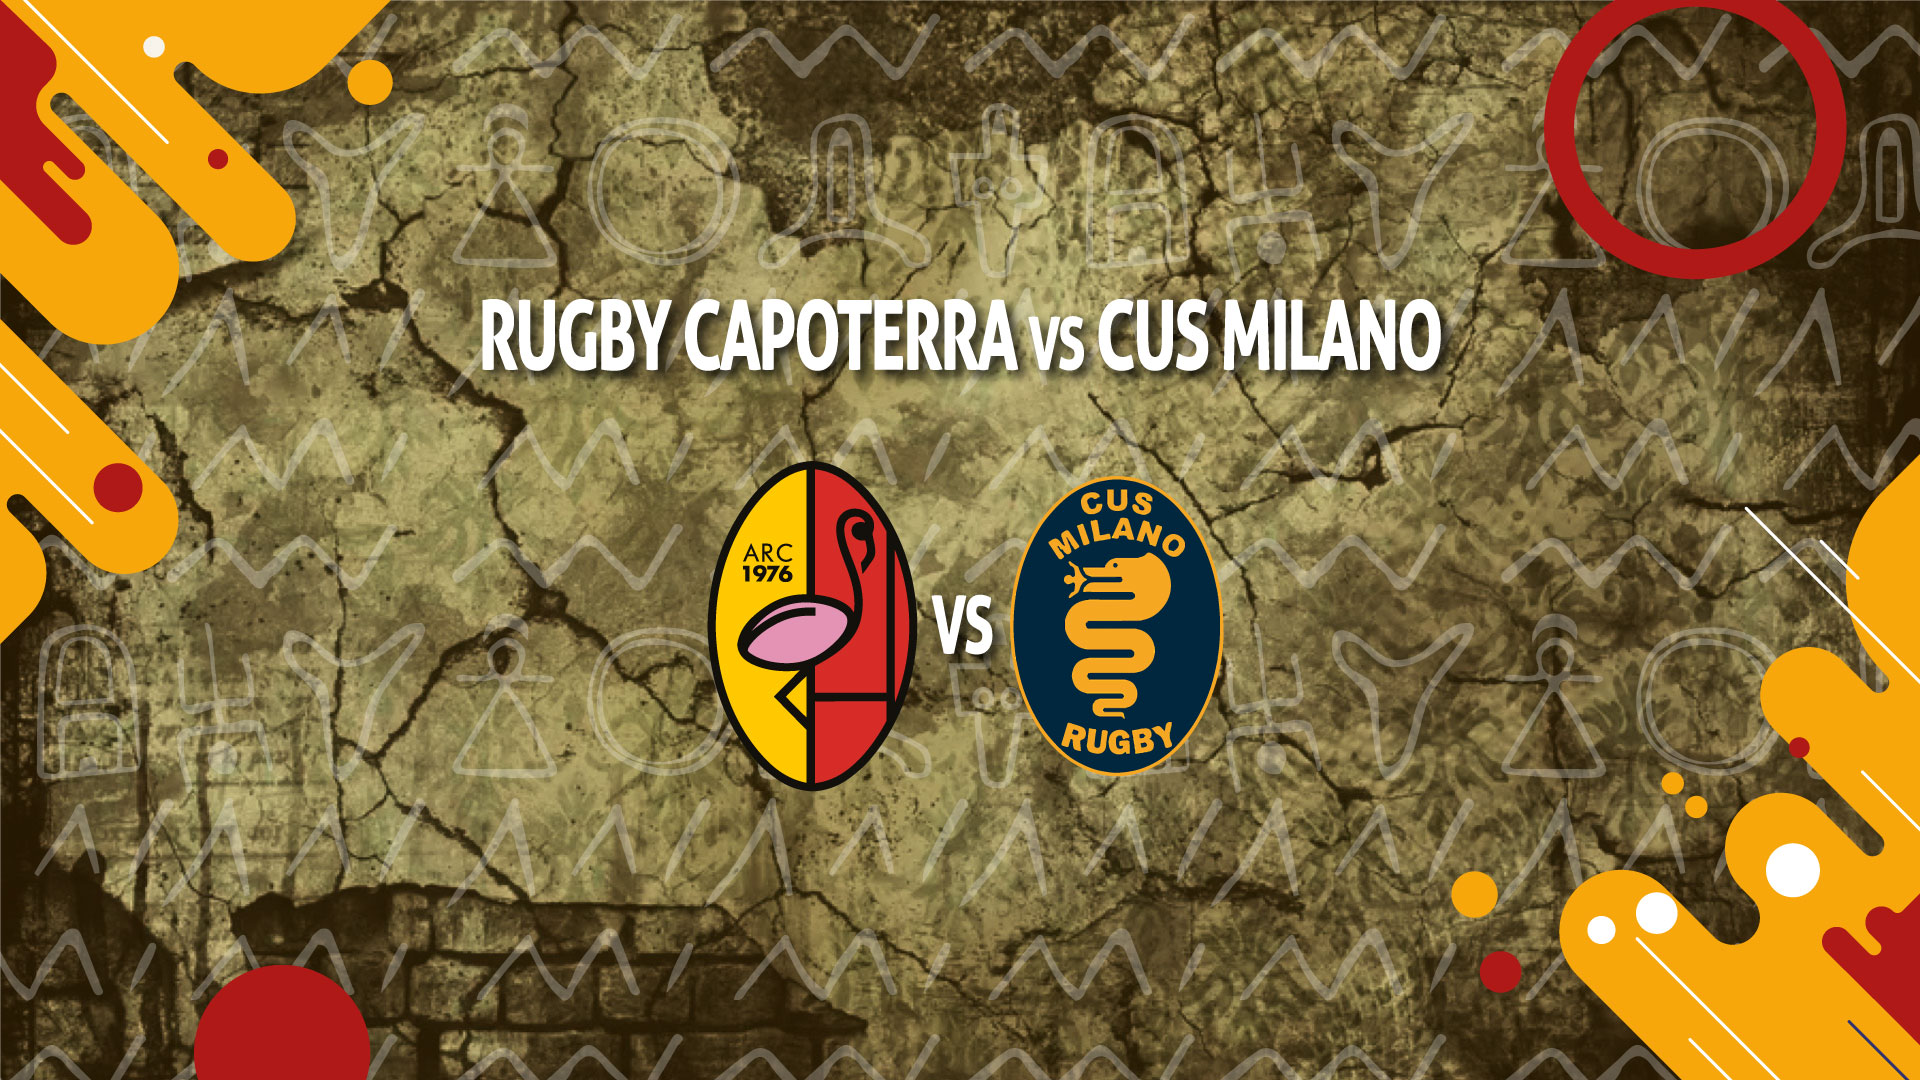 Rugby Capoterra vs Cus Milano